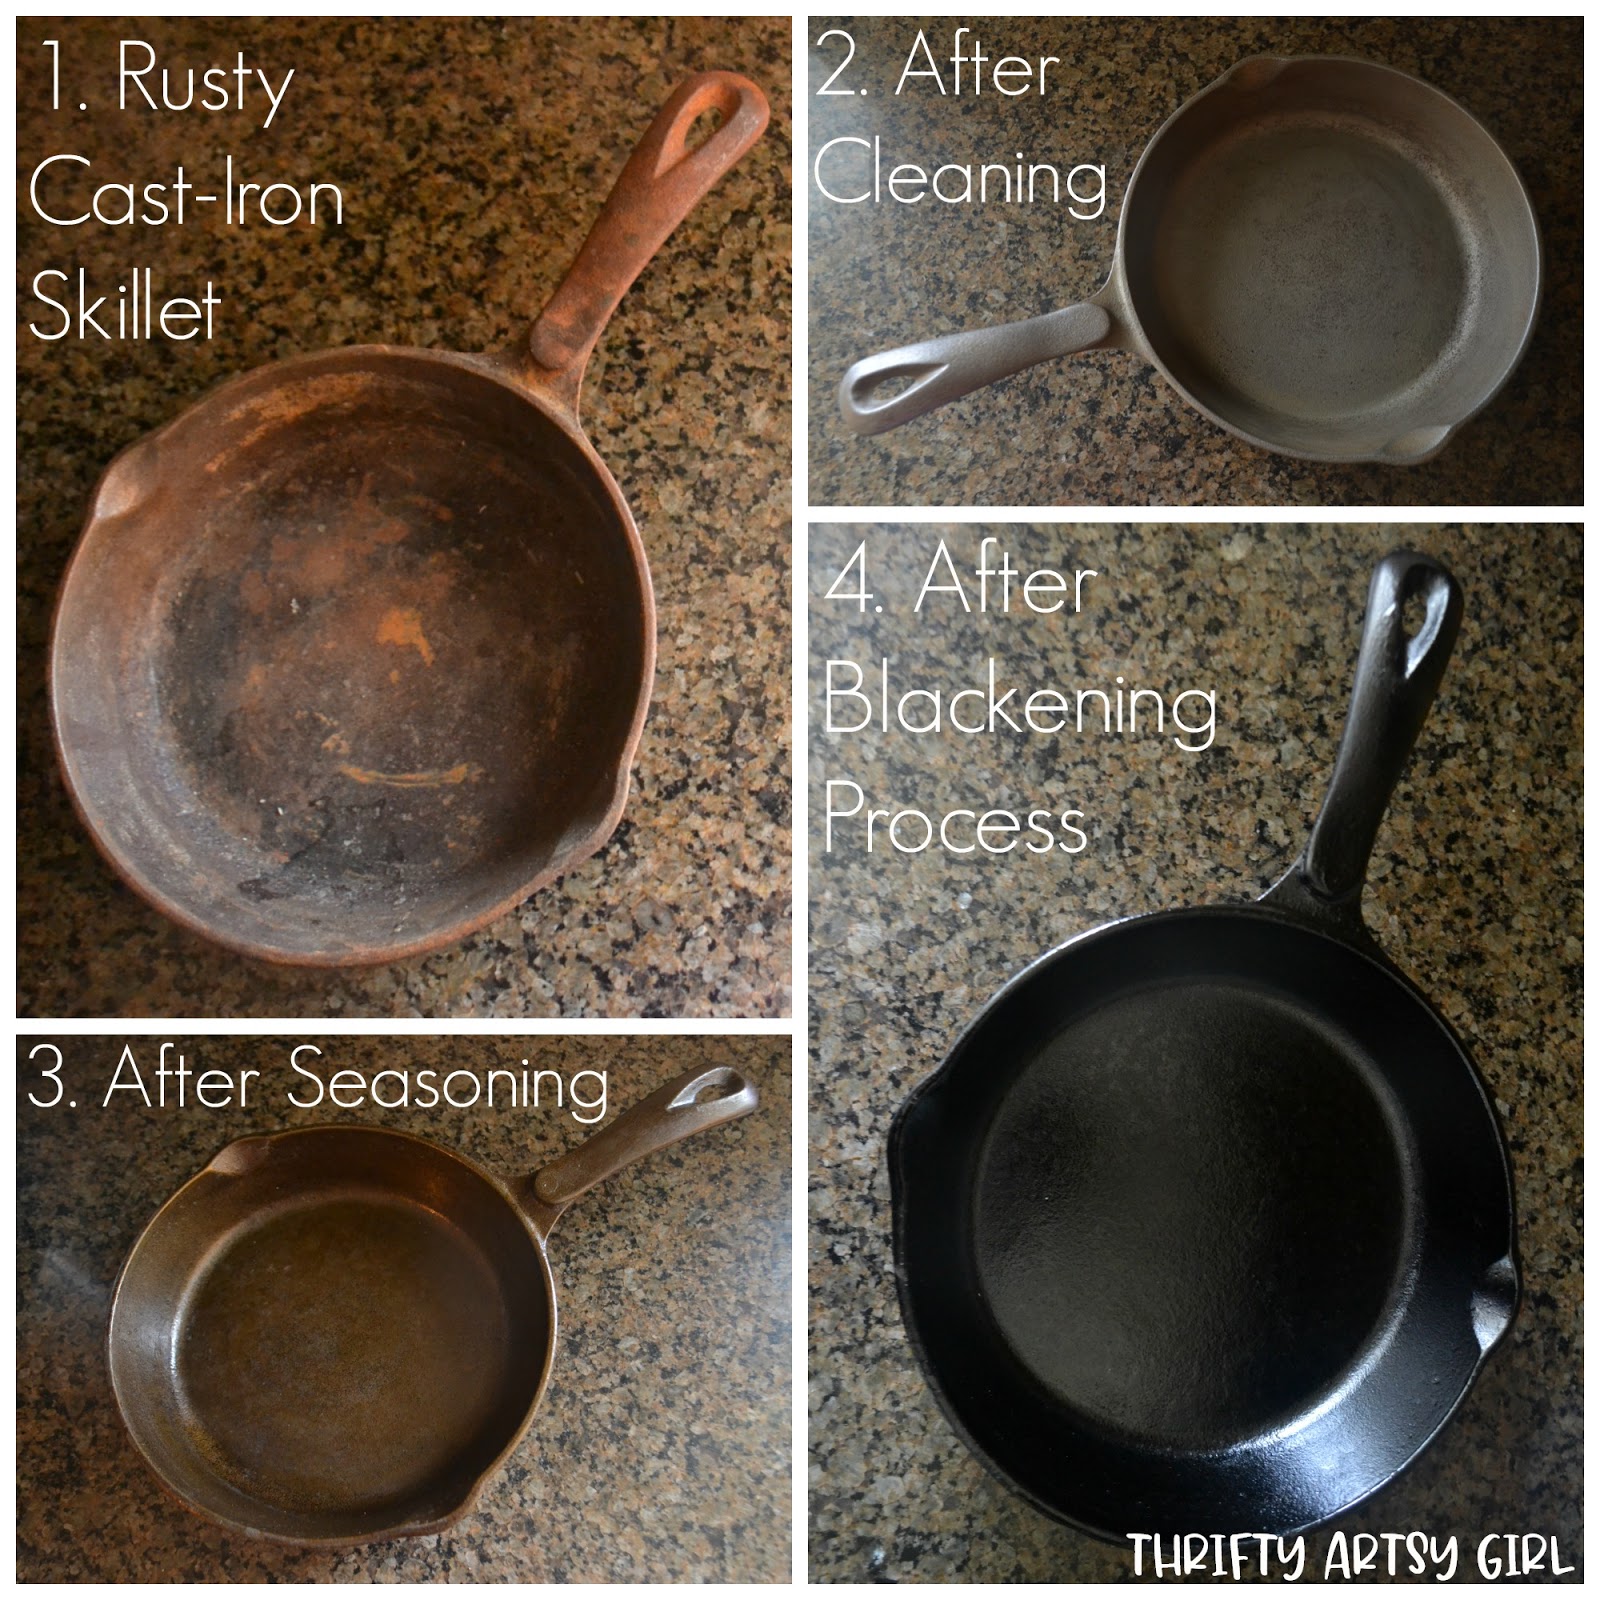 New cast iron skillet came out rusty after seasoning - Seasoned Advice